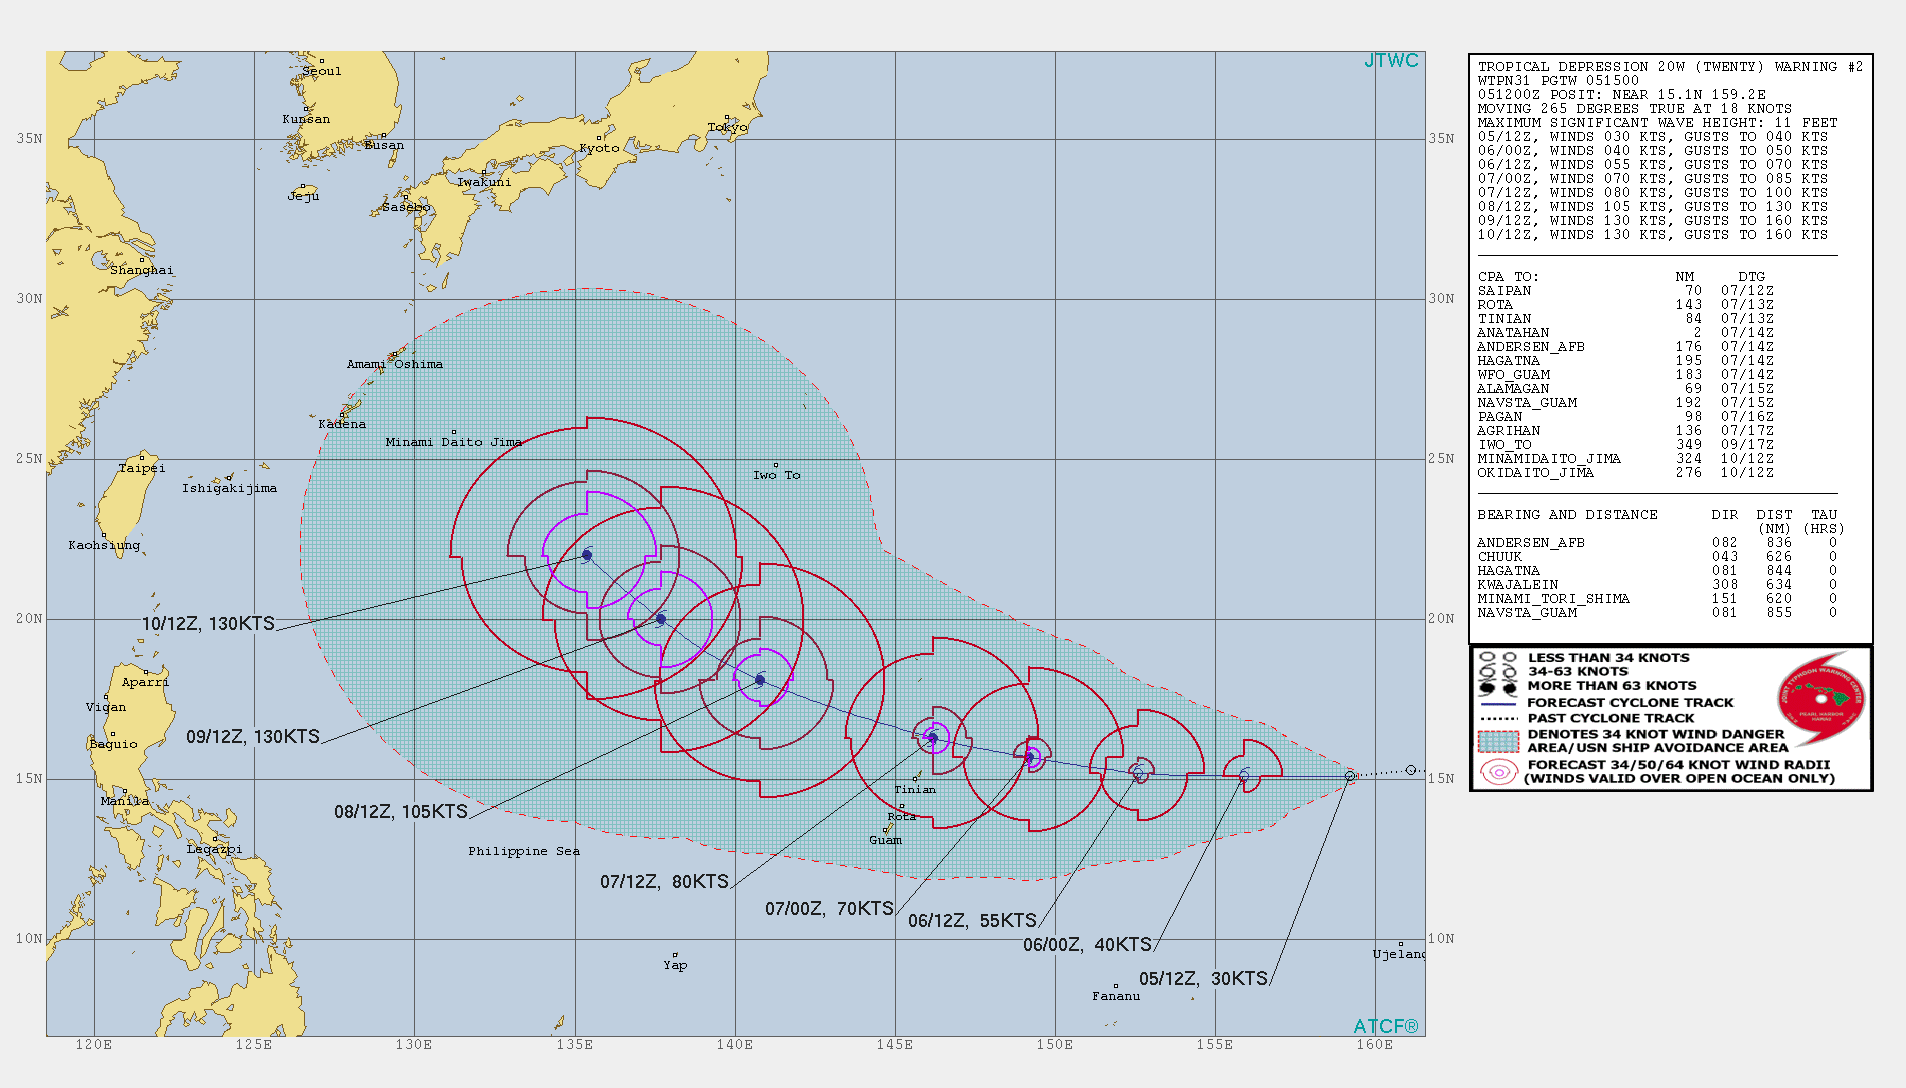 FORECAST TO REACH 130KNOTS(SUPER TYPHOON) IN 96H